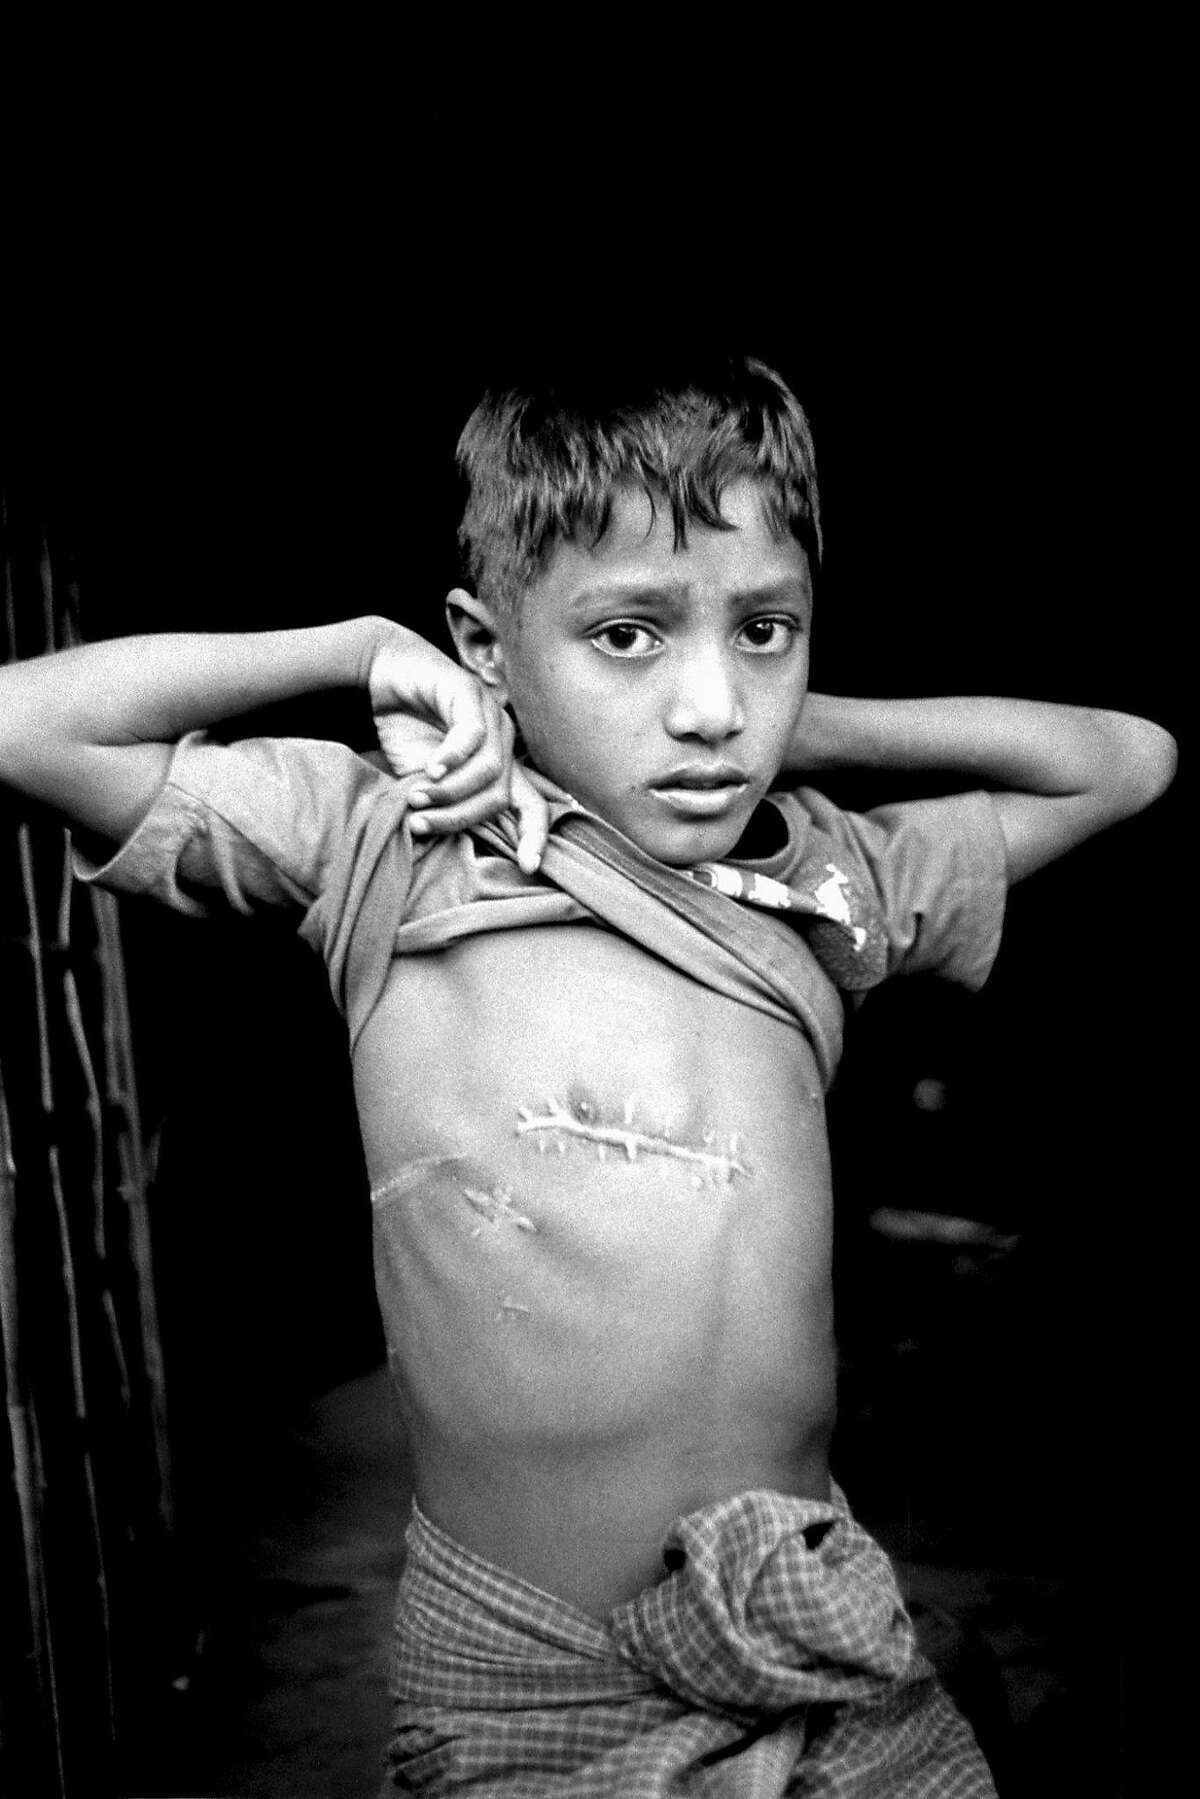 Mohamed Shoaib, 7, a Rohingya boy from Maungdaw, Myanmar, was shot in the chest by government security forces while waiting near the border of Bangladesh for a boat driver to help him escape into that country. Kutupalong, Bangladesh 2017.